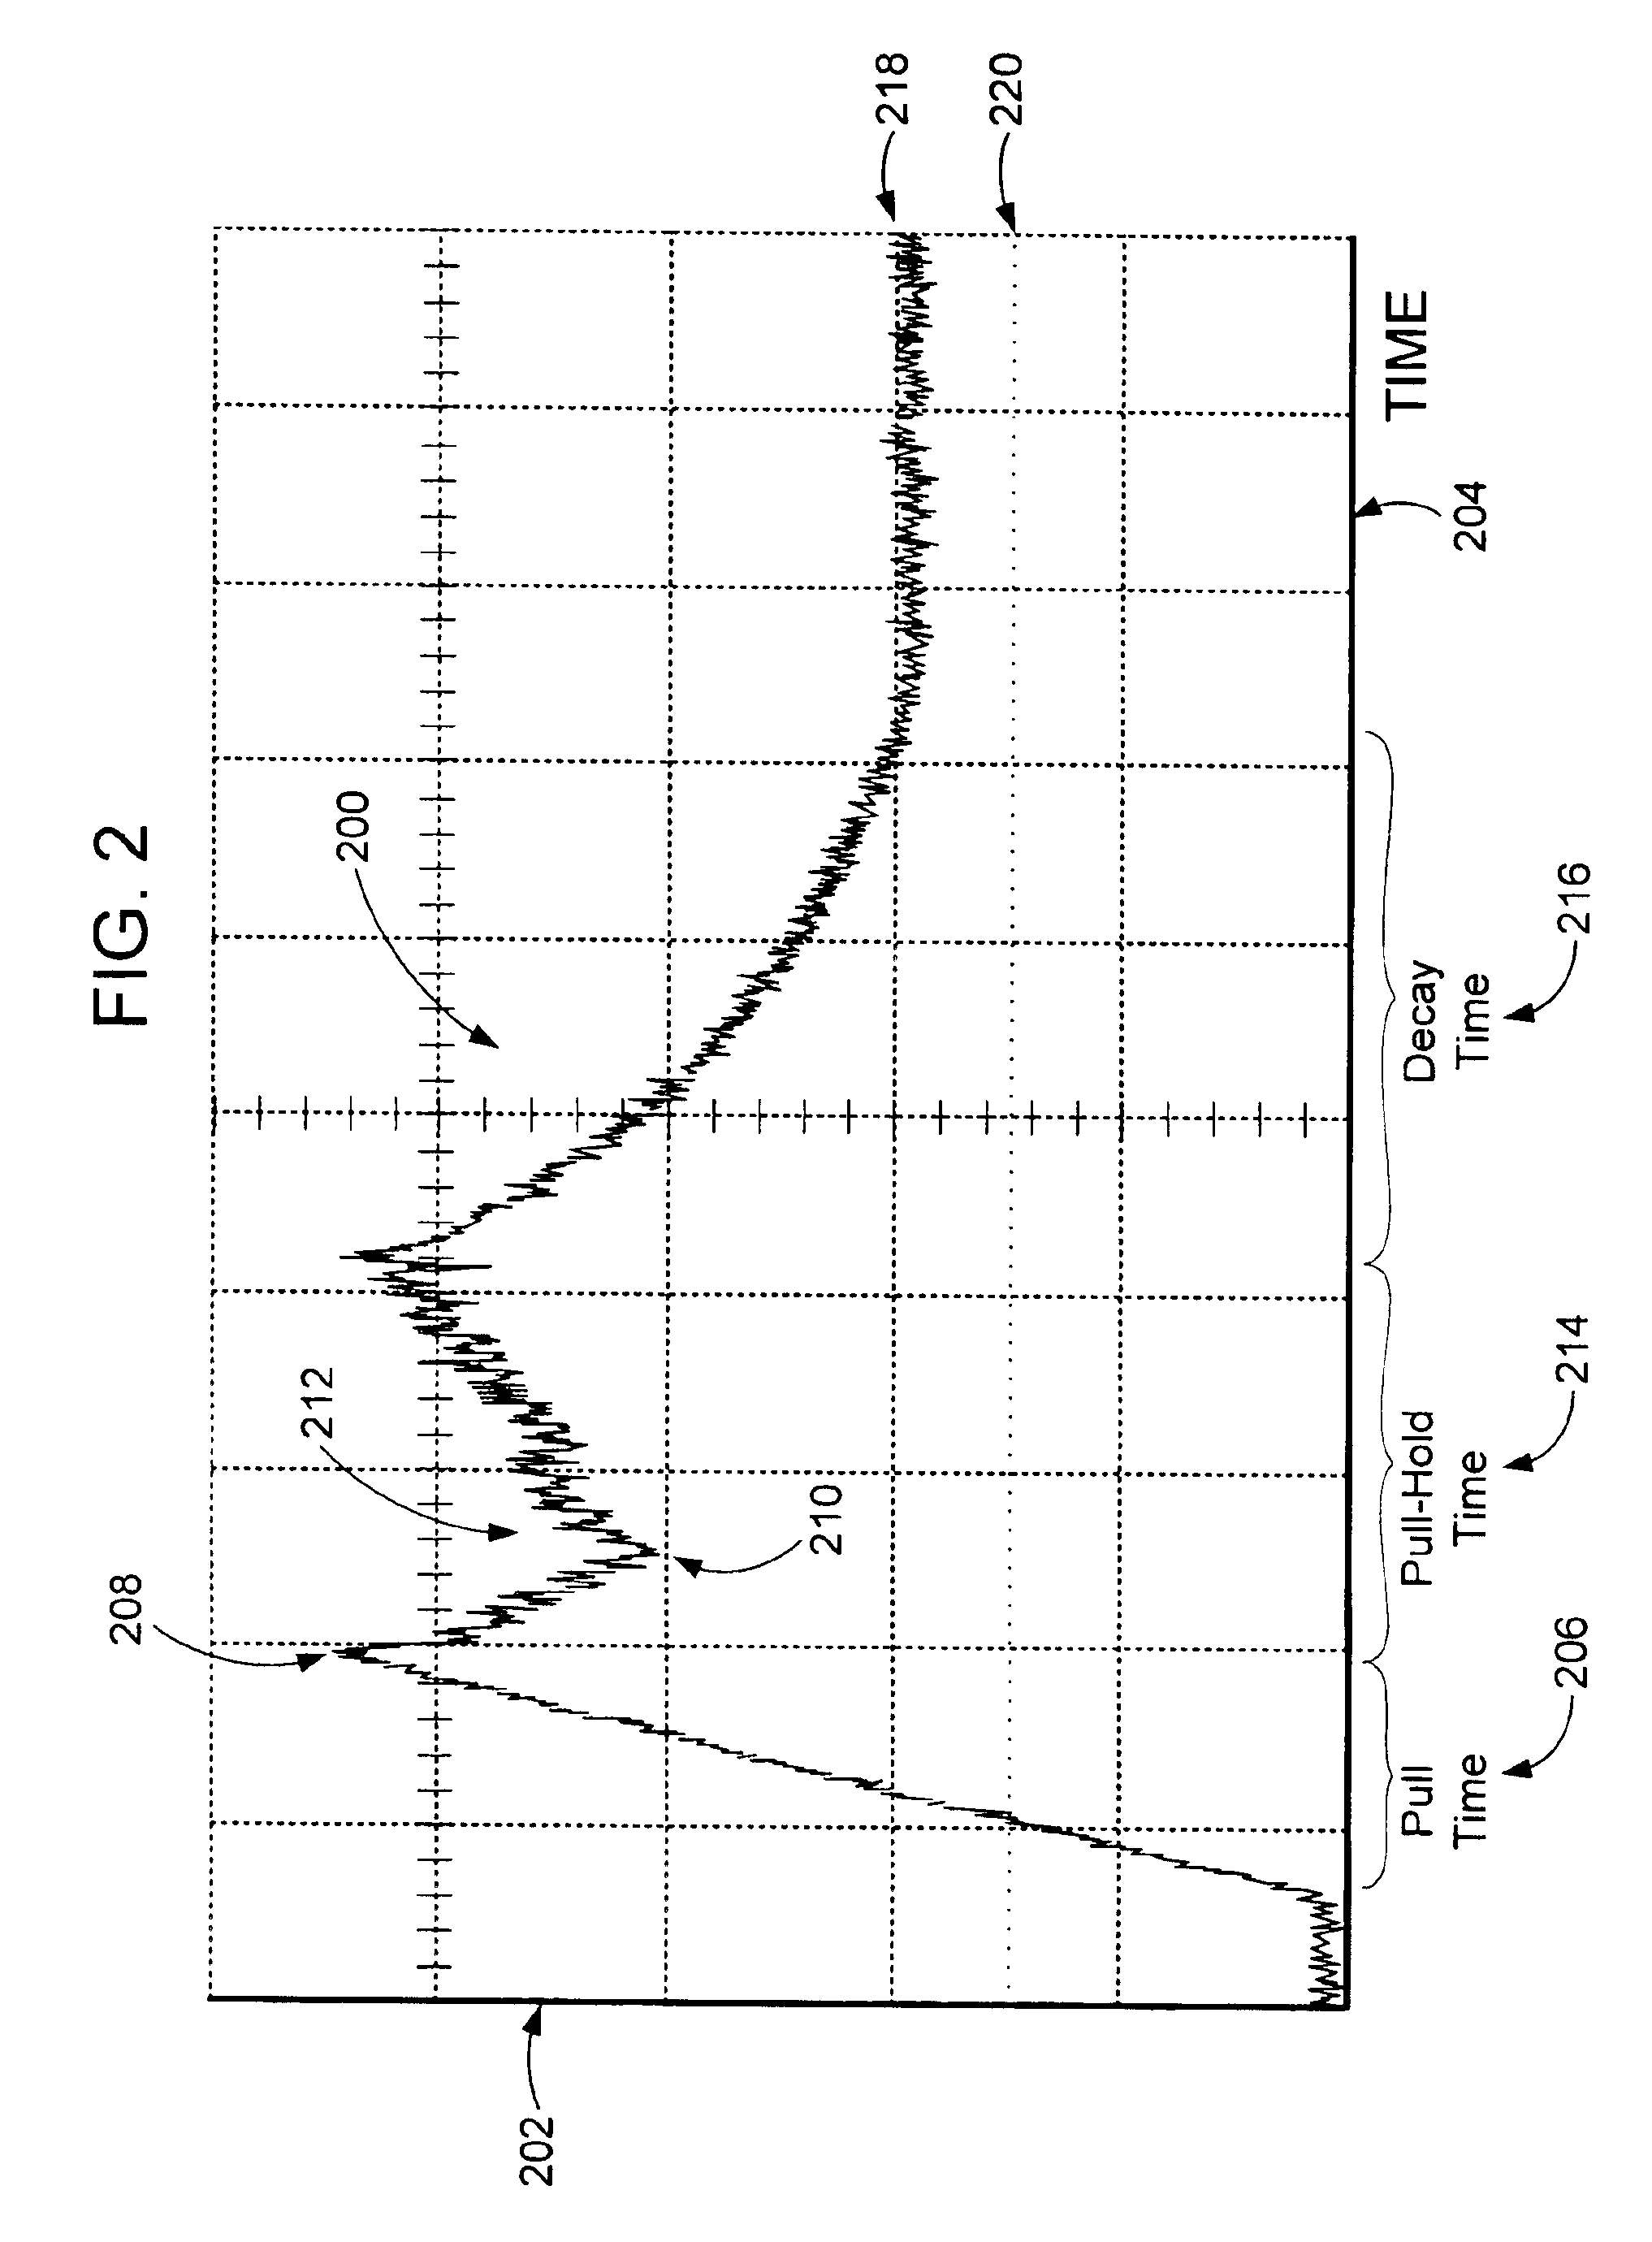 Method to adaptively control and derive the control voltage of solenoid operated valves based on the valve closure point